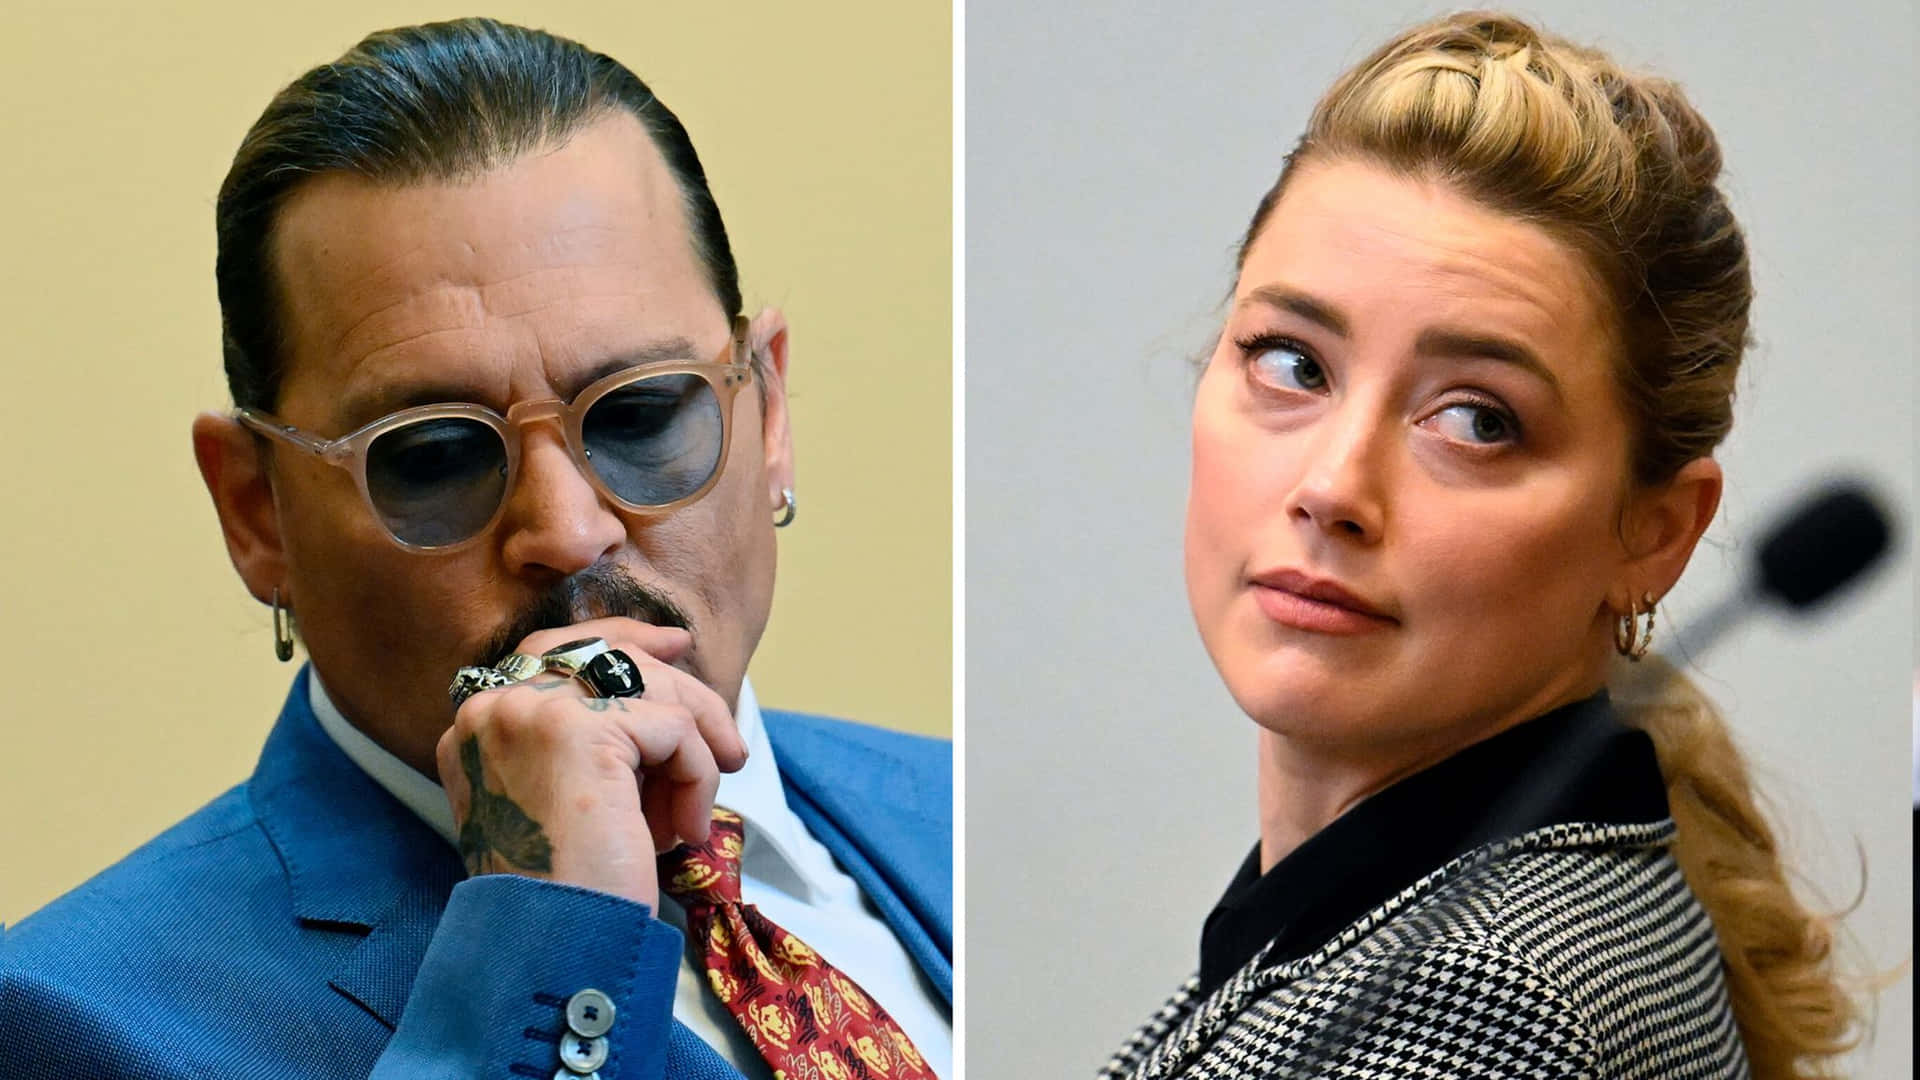 Johnny Depp and Amber Heard share a romantic moment.